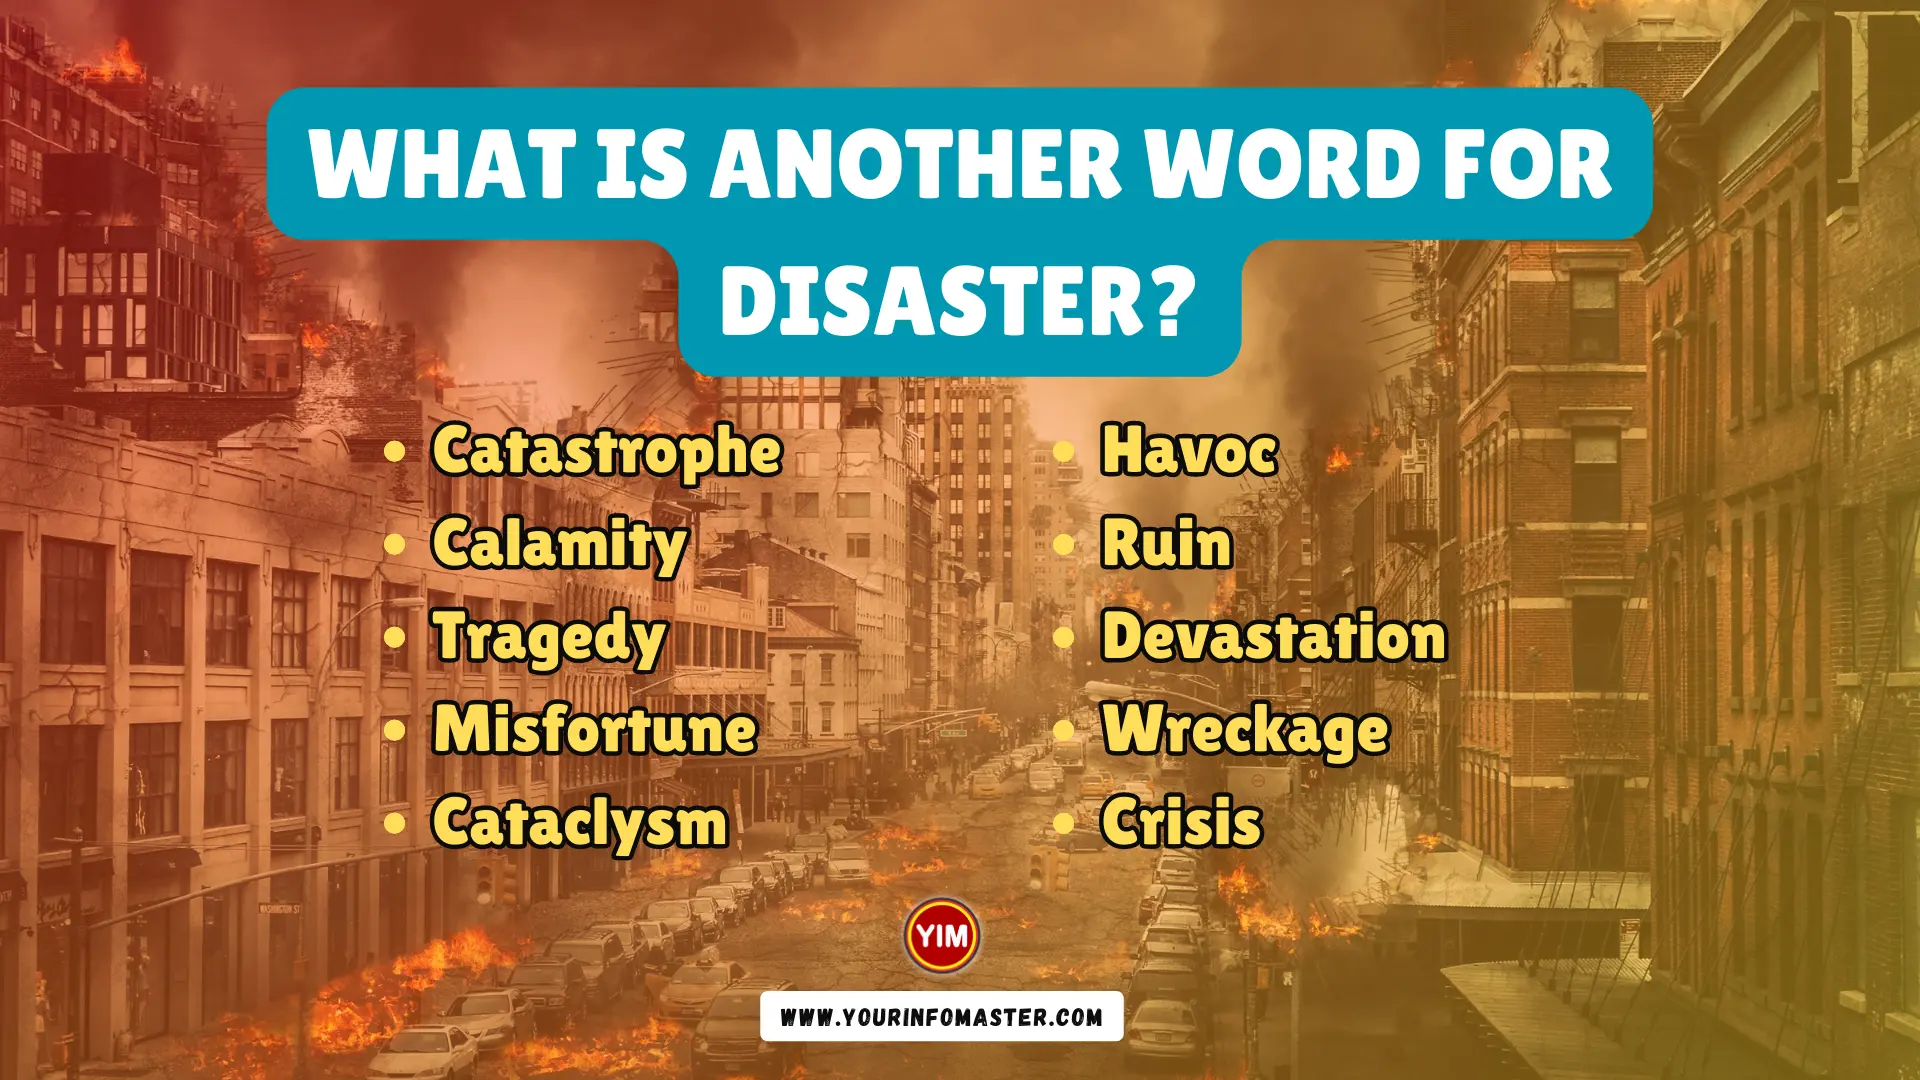 What is another word for Disaster